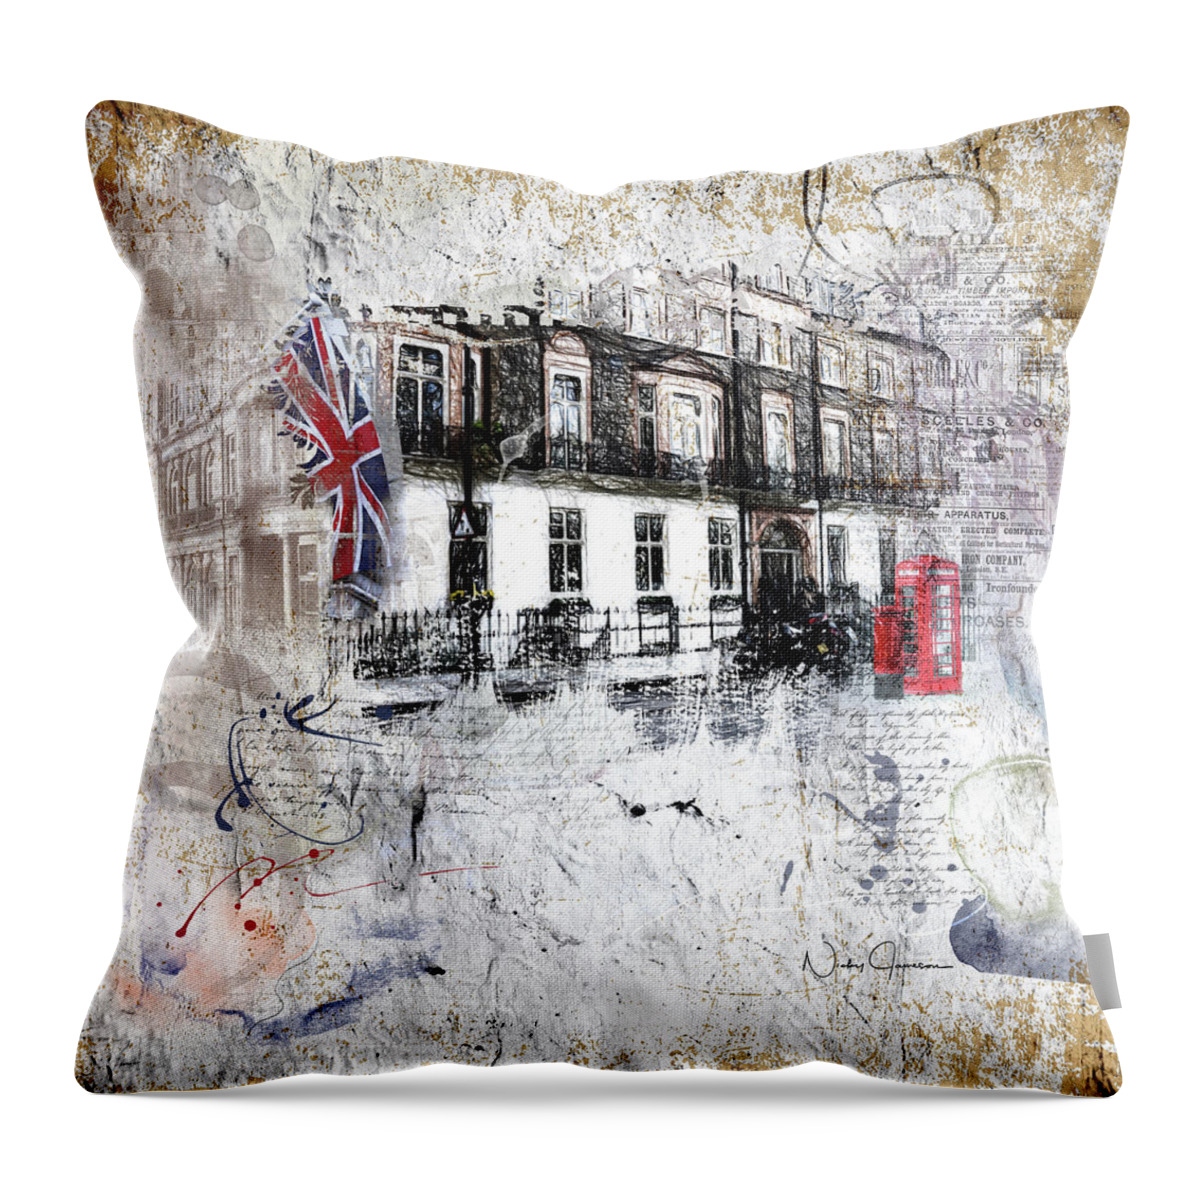 London Throw Pillow featuring the digital art Timeless by Nicky Jameson